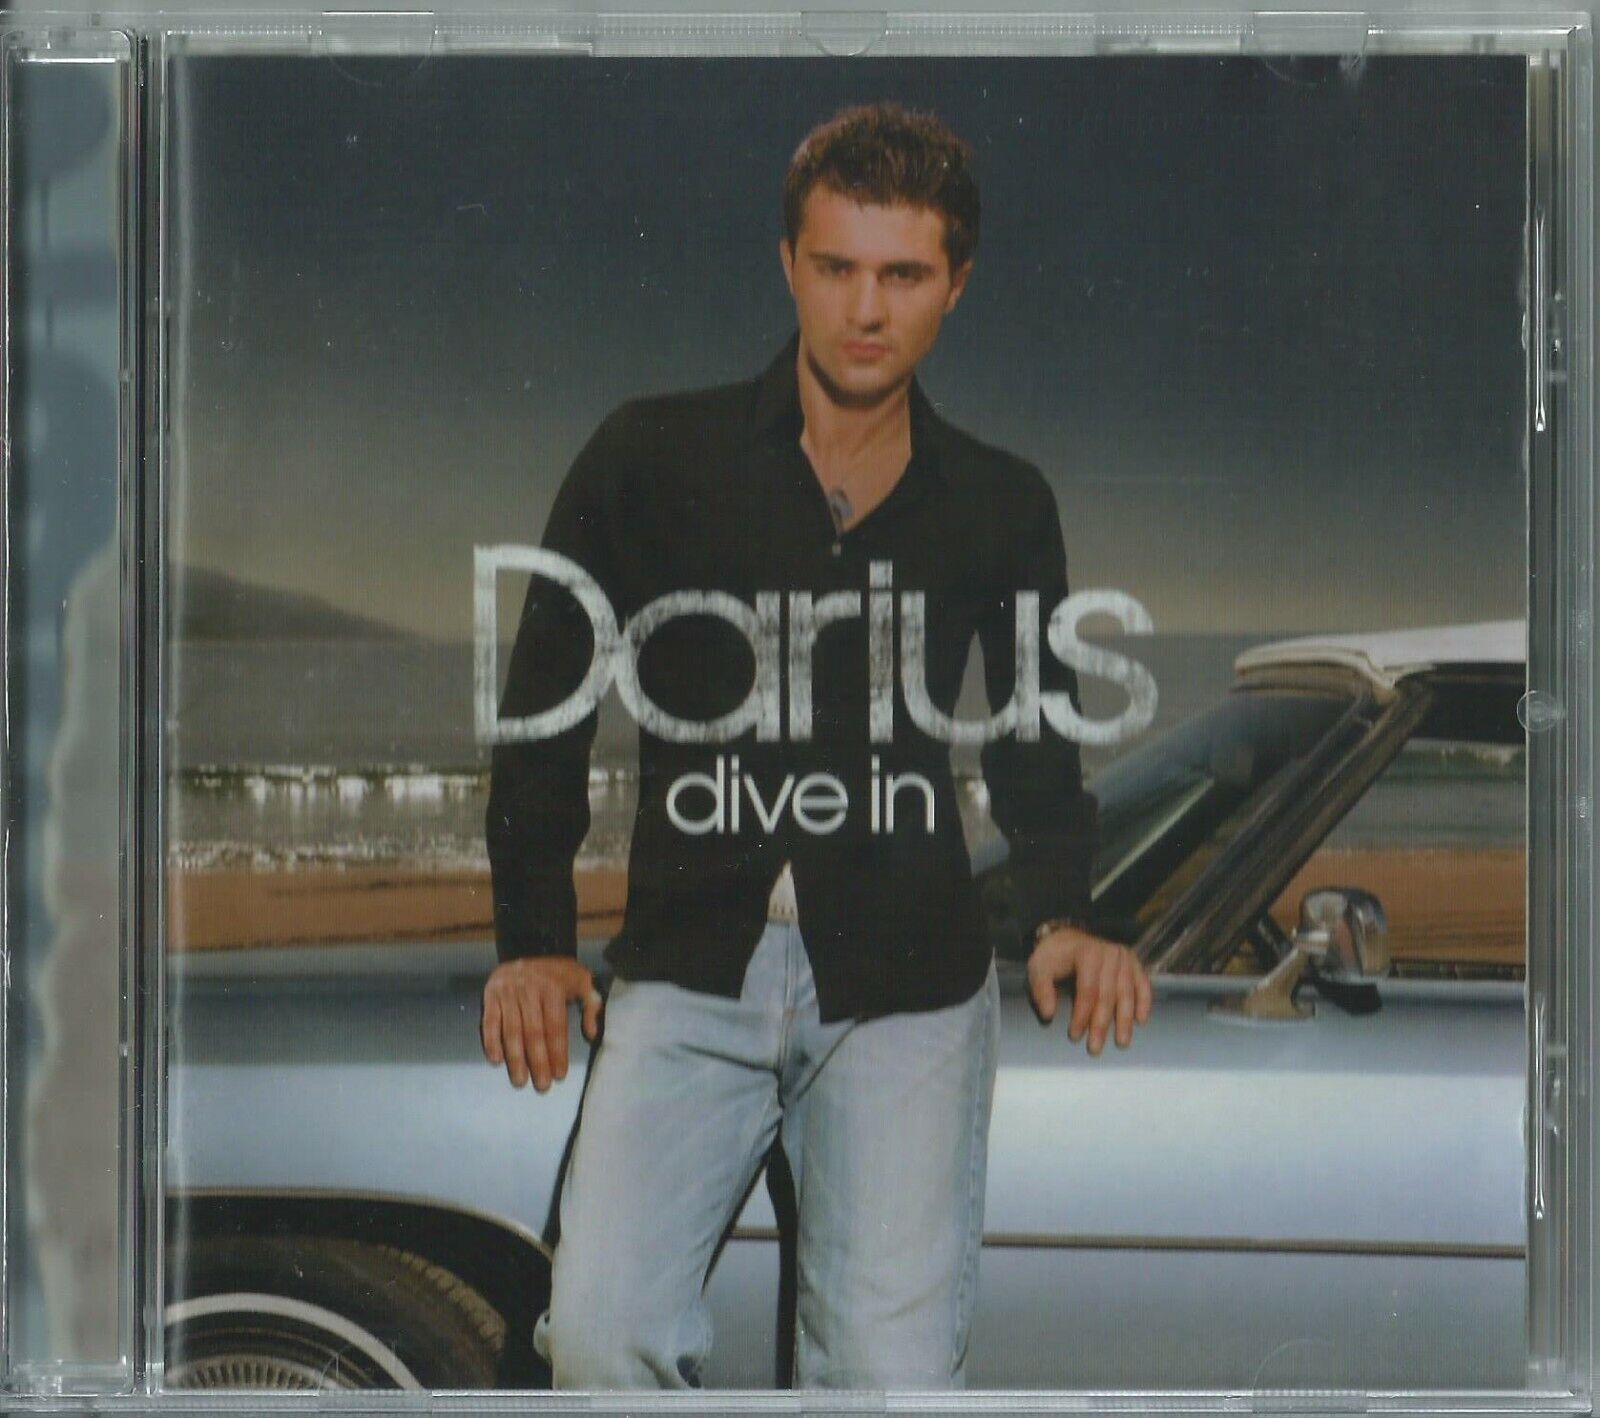 Primary image for DARIUS - DIVE IN 2002 EU CD APPEARED ON UK TV SHOWS: POPSTARS AND THEN POP IDOL